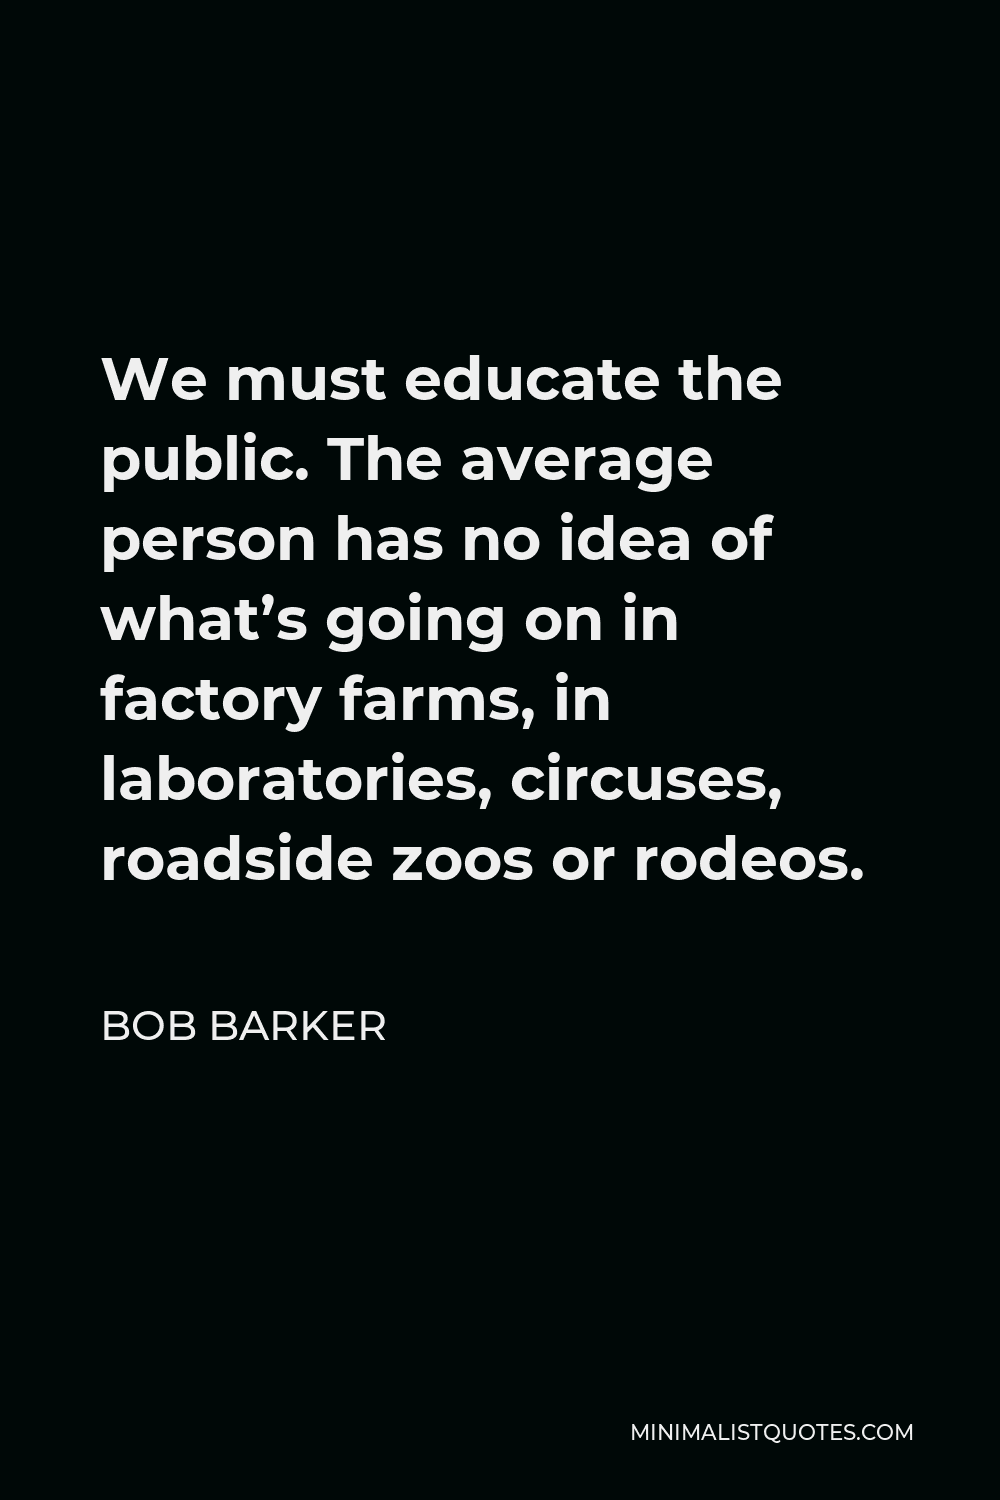 Bob Barker Quote - We must educate the public. The average person has no idea of what’s going on in factory farms, in laboratories, circuses, roadside zoos or rodeos.